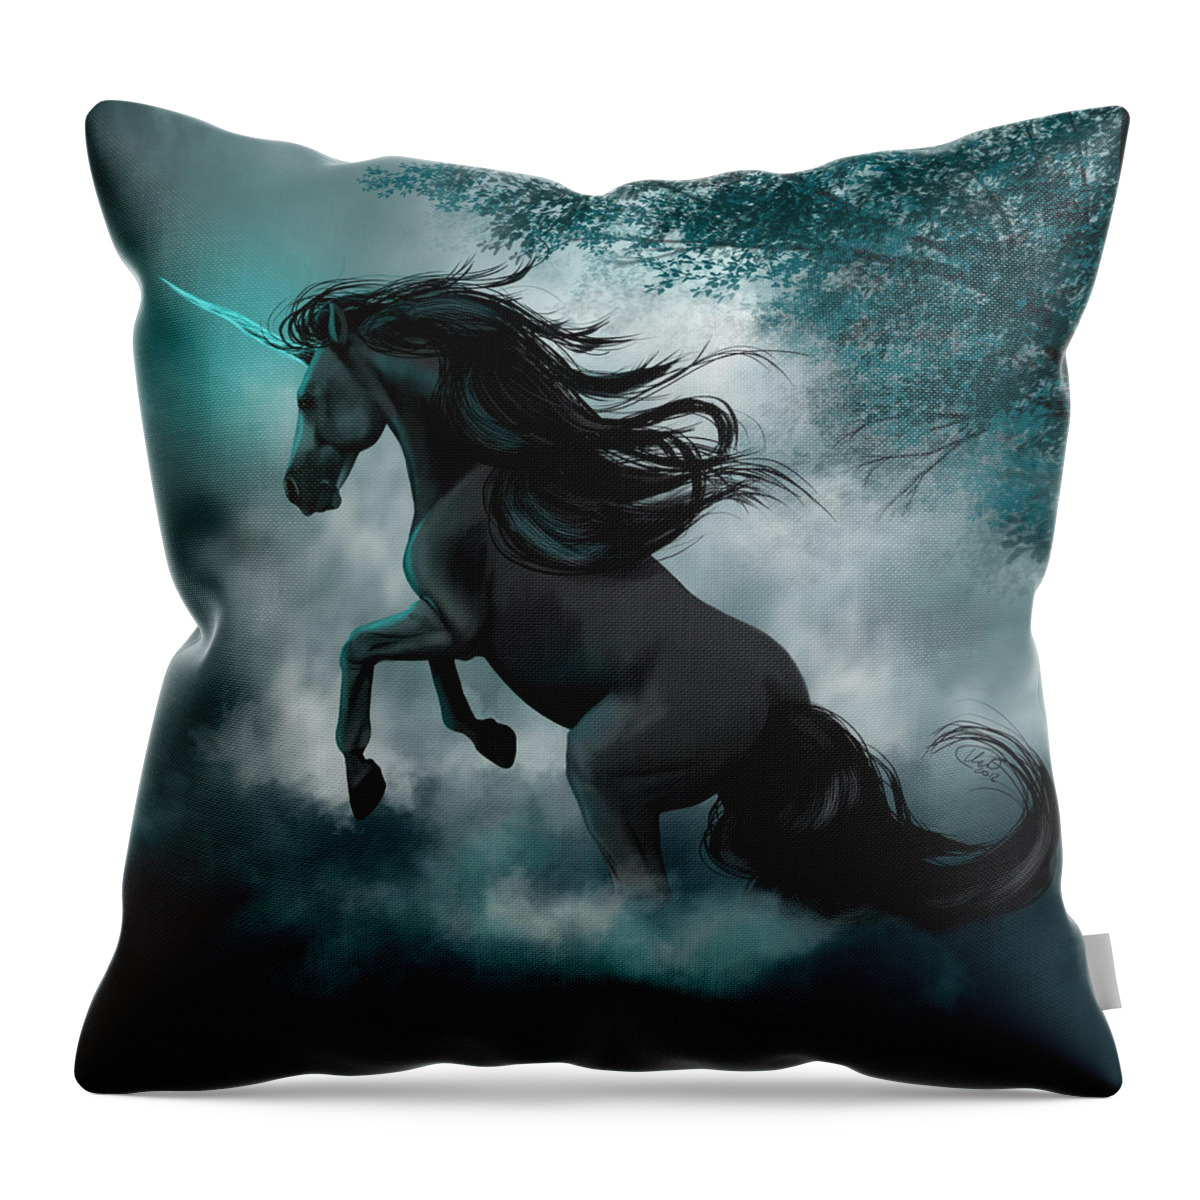 Horse Throw Pillow featuring the digital art Only Dreams Remain by Kate Black